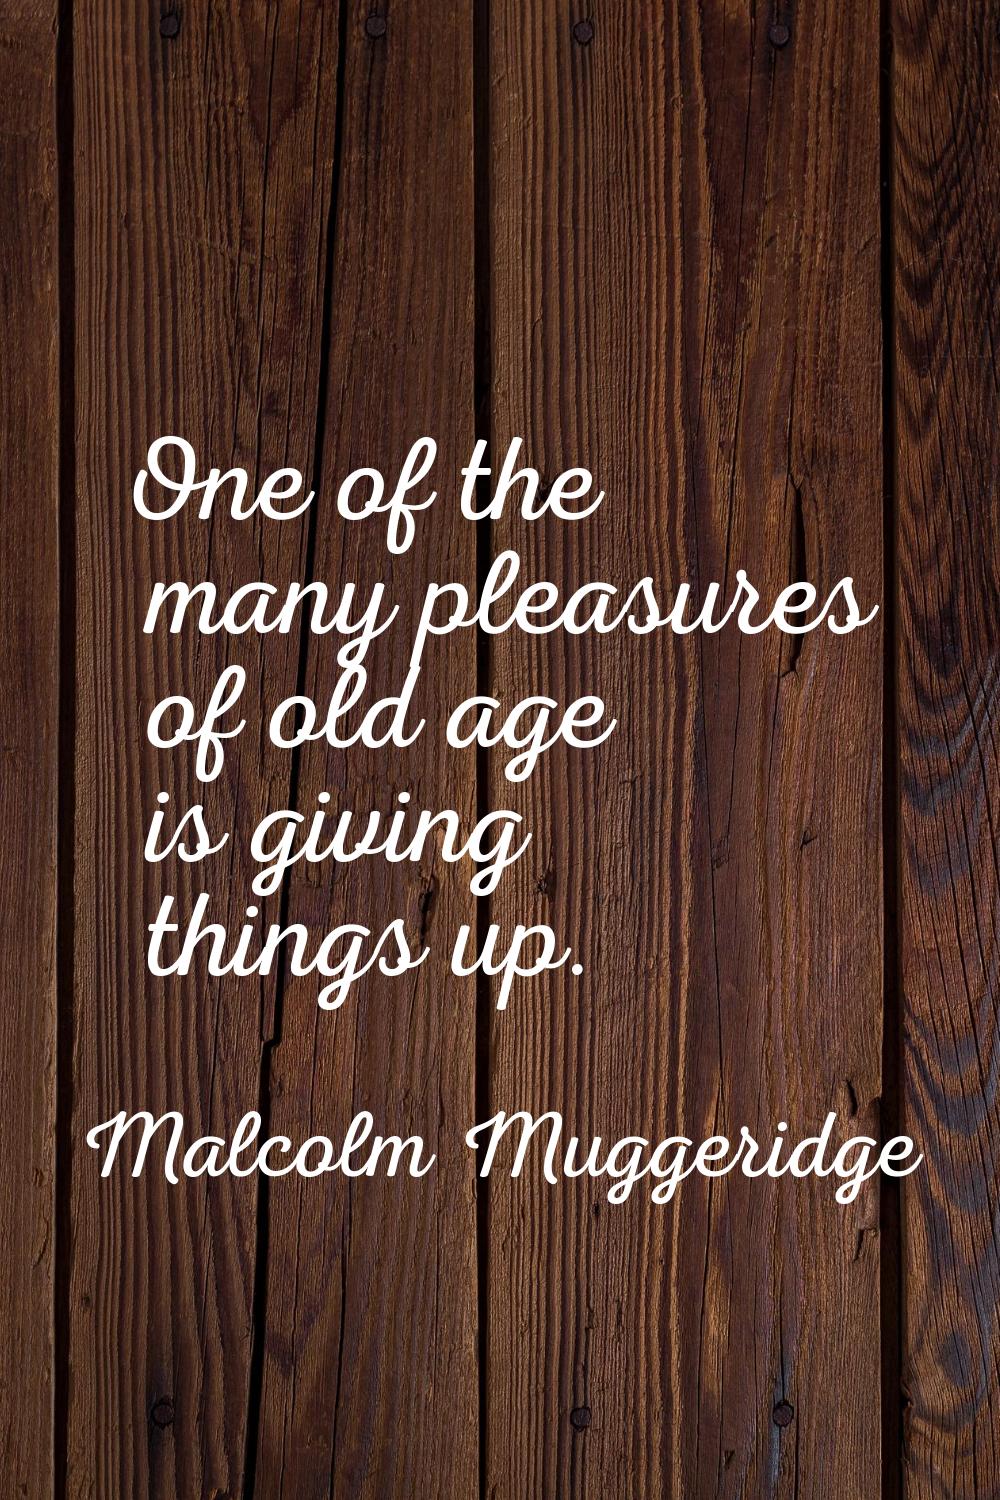 One of the many pleasures of old age is giving things up.